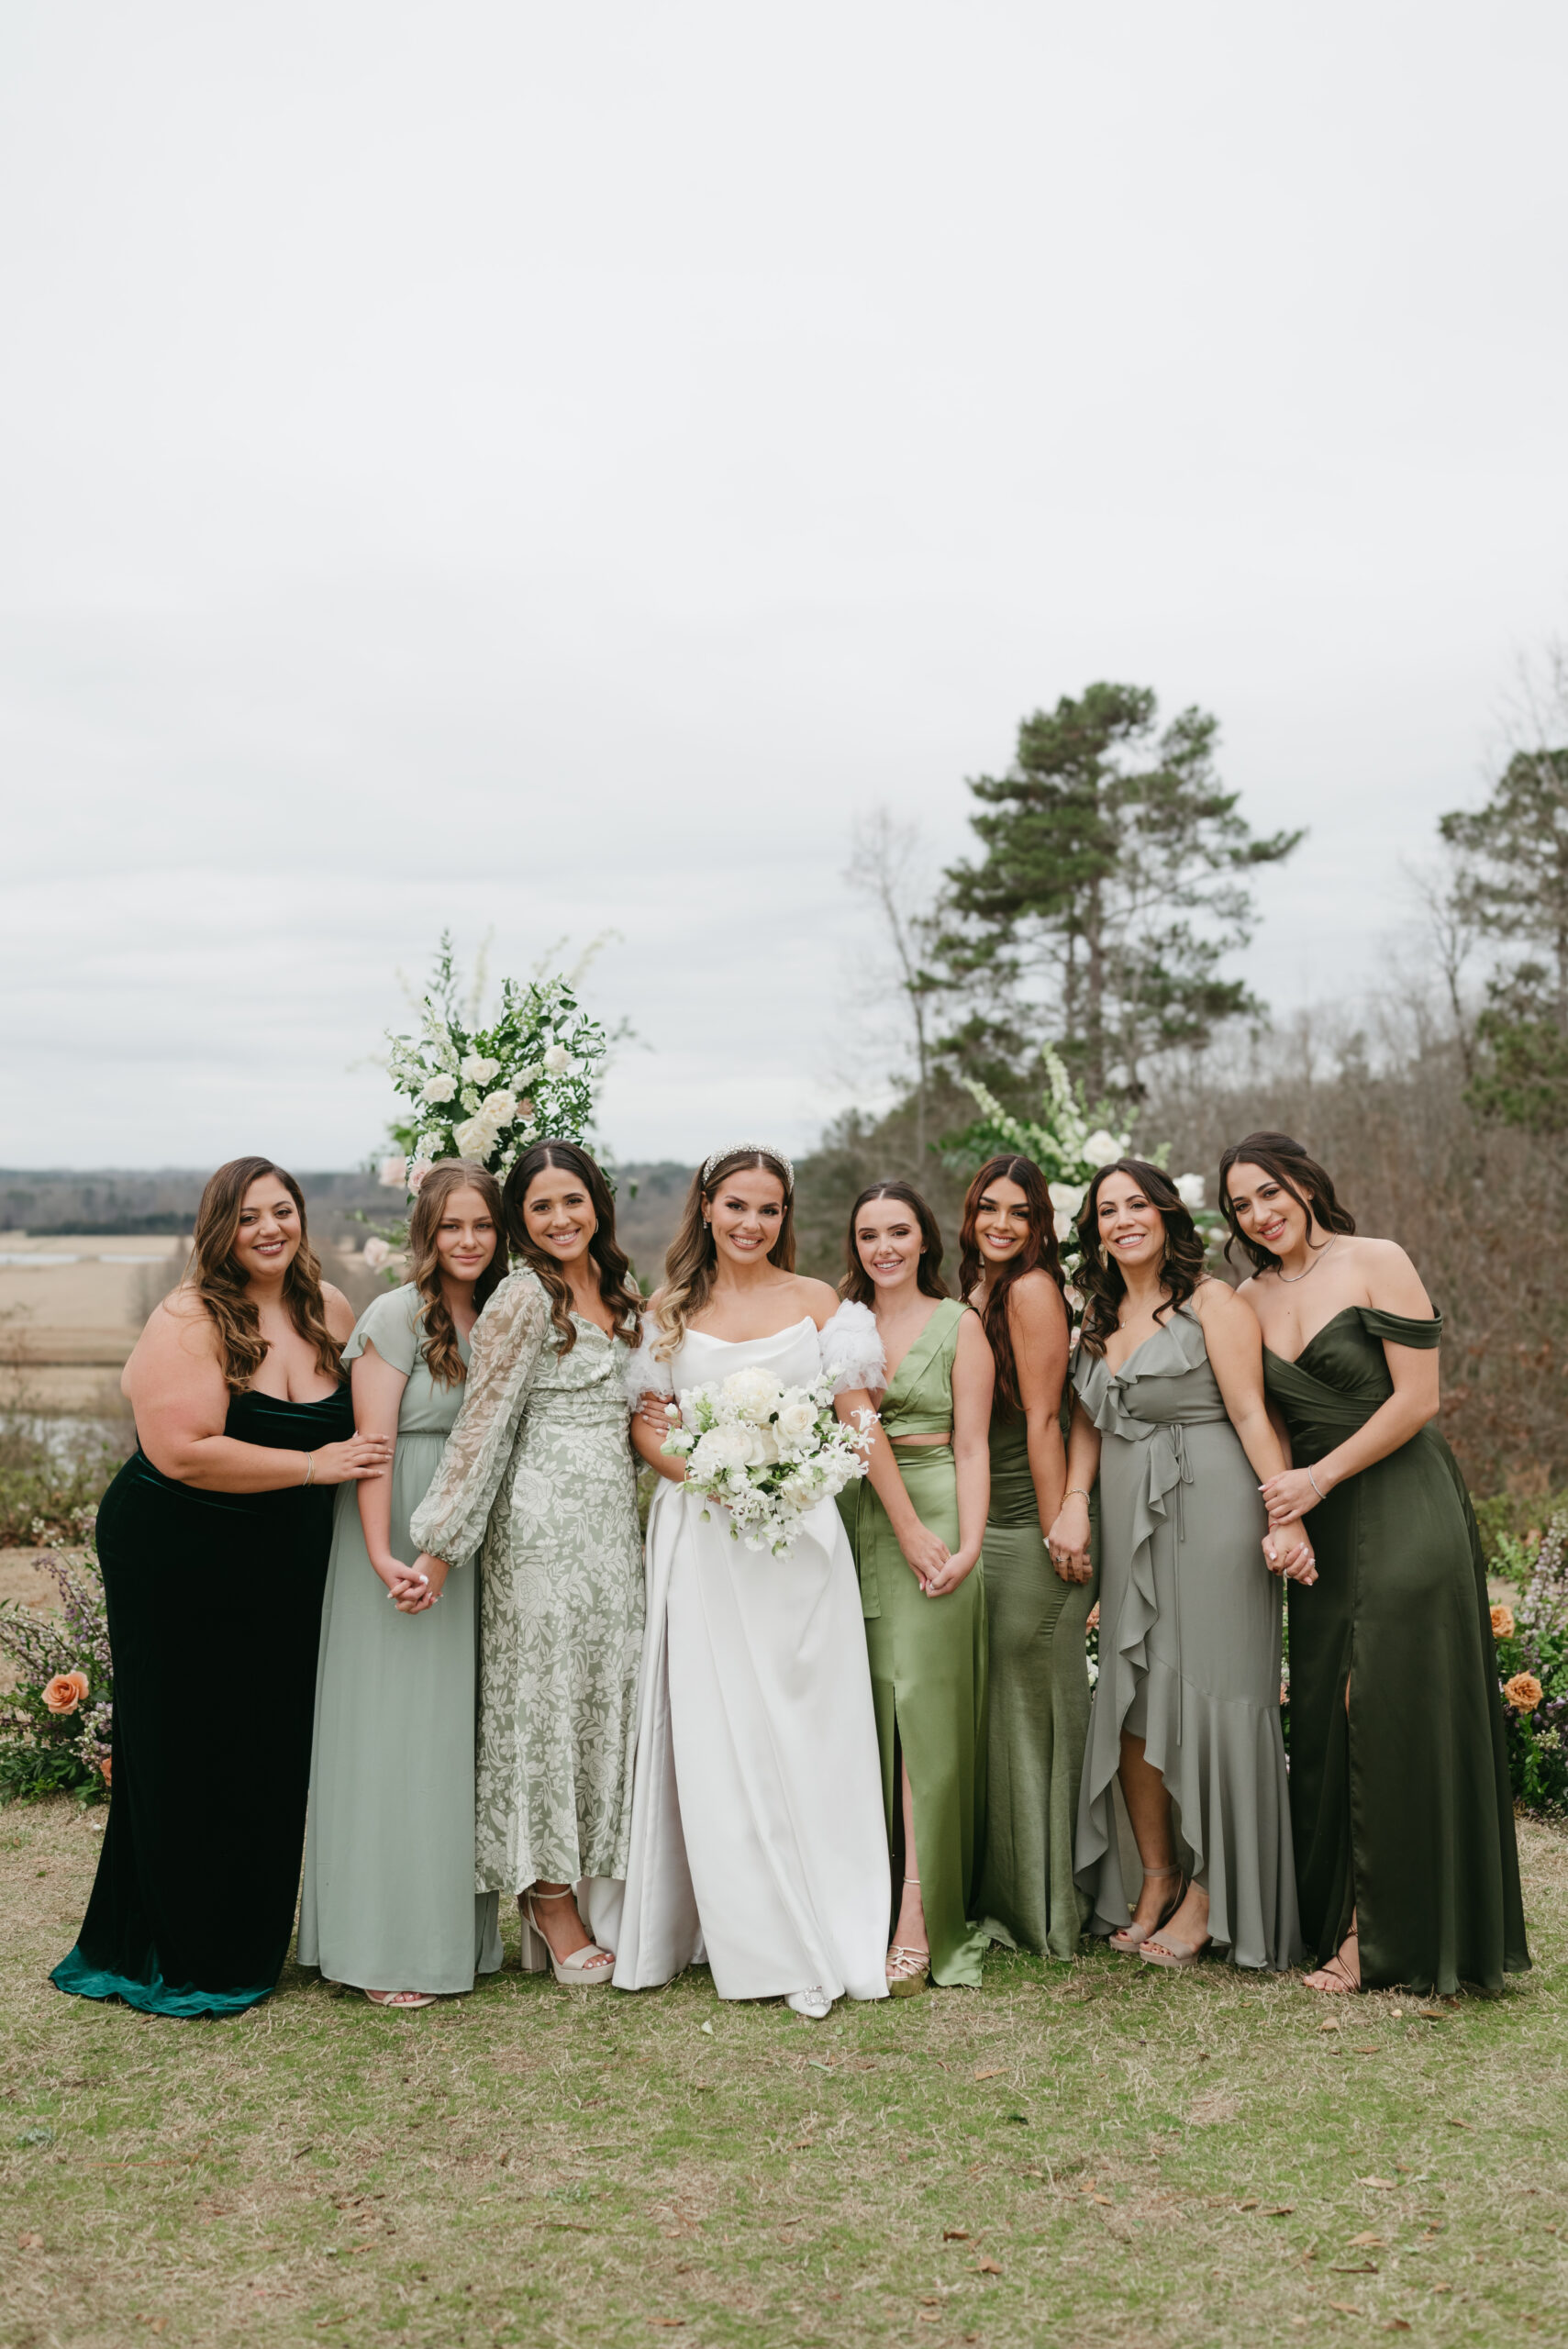 These green bridesmaid dresses brought a garden party feel to a cold December wedding at Foxhall Resort. | Megan Kuhn Photography